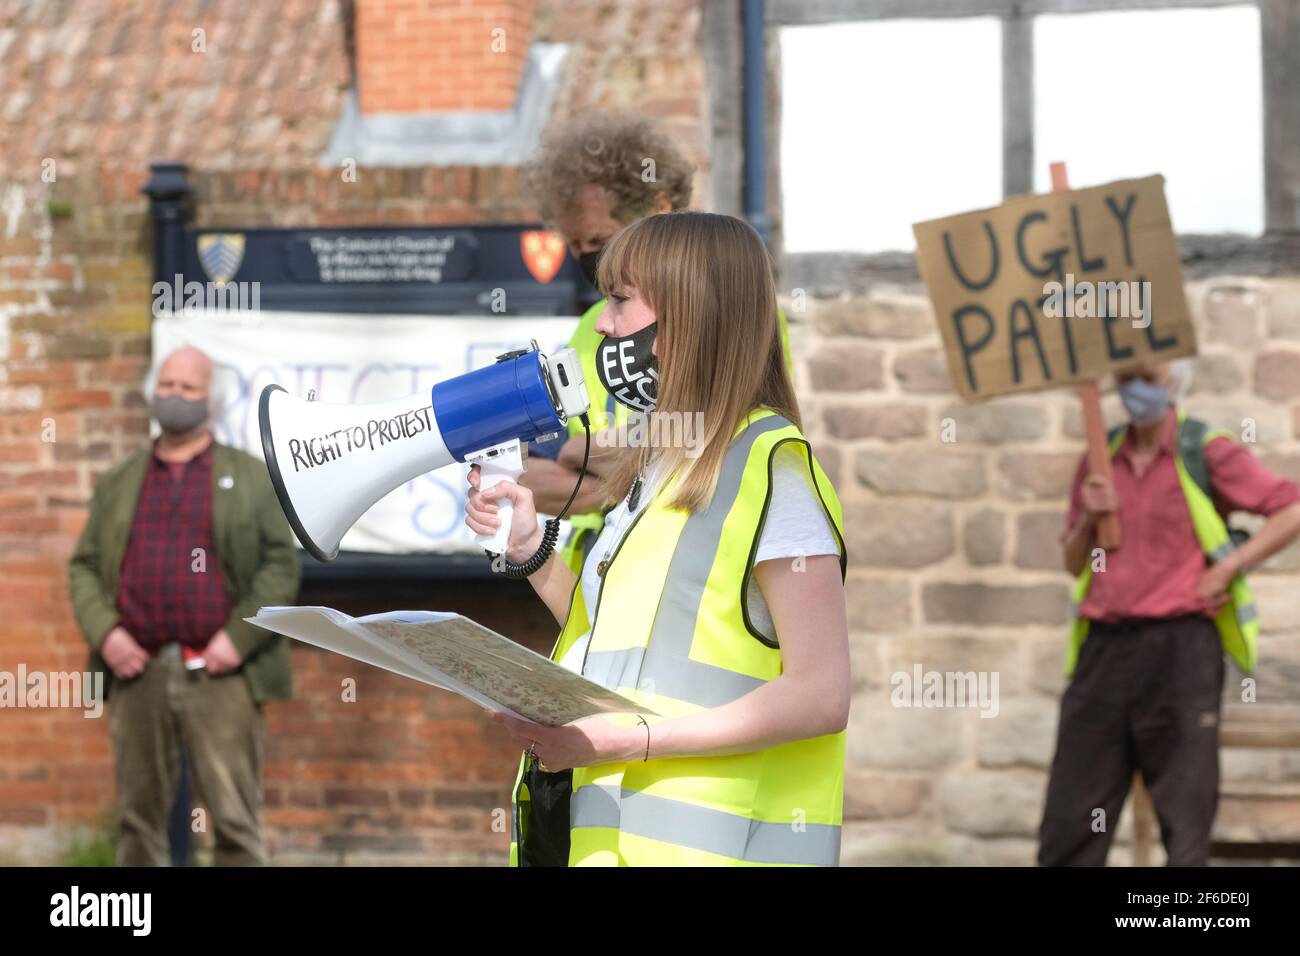 Hereford, Herefordshire, UK – Wednesday 31st March 2021 – Protesters demonstrate on the Cathedral Green against the new Police, Crime, Sentencing and Courts Bill ( PCSC ) which they feel will limit their rights to legal protest. Photo Steven May / Alamy Live News Stock Photo